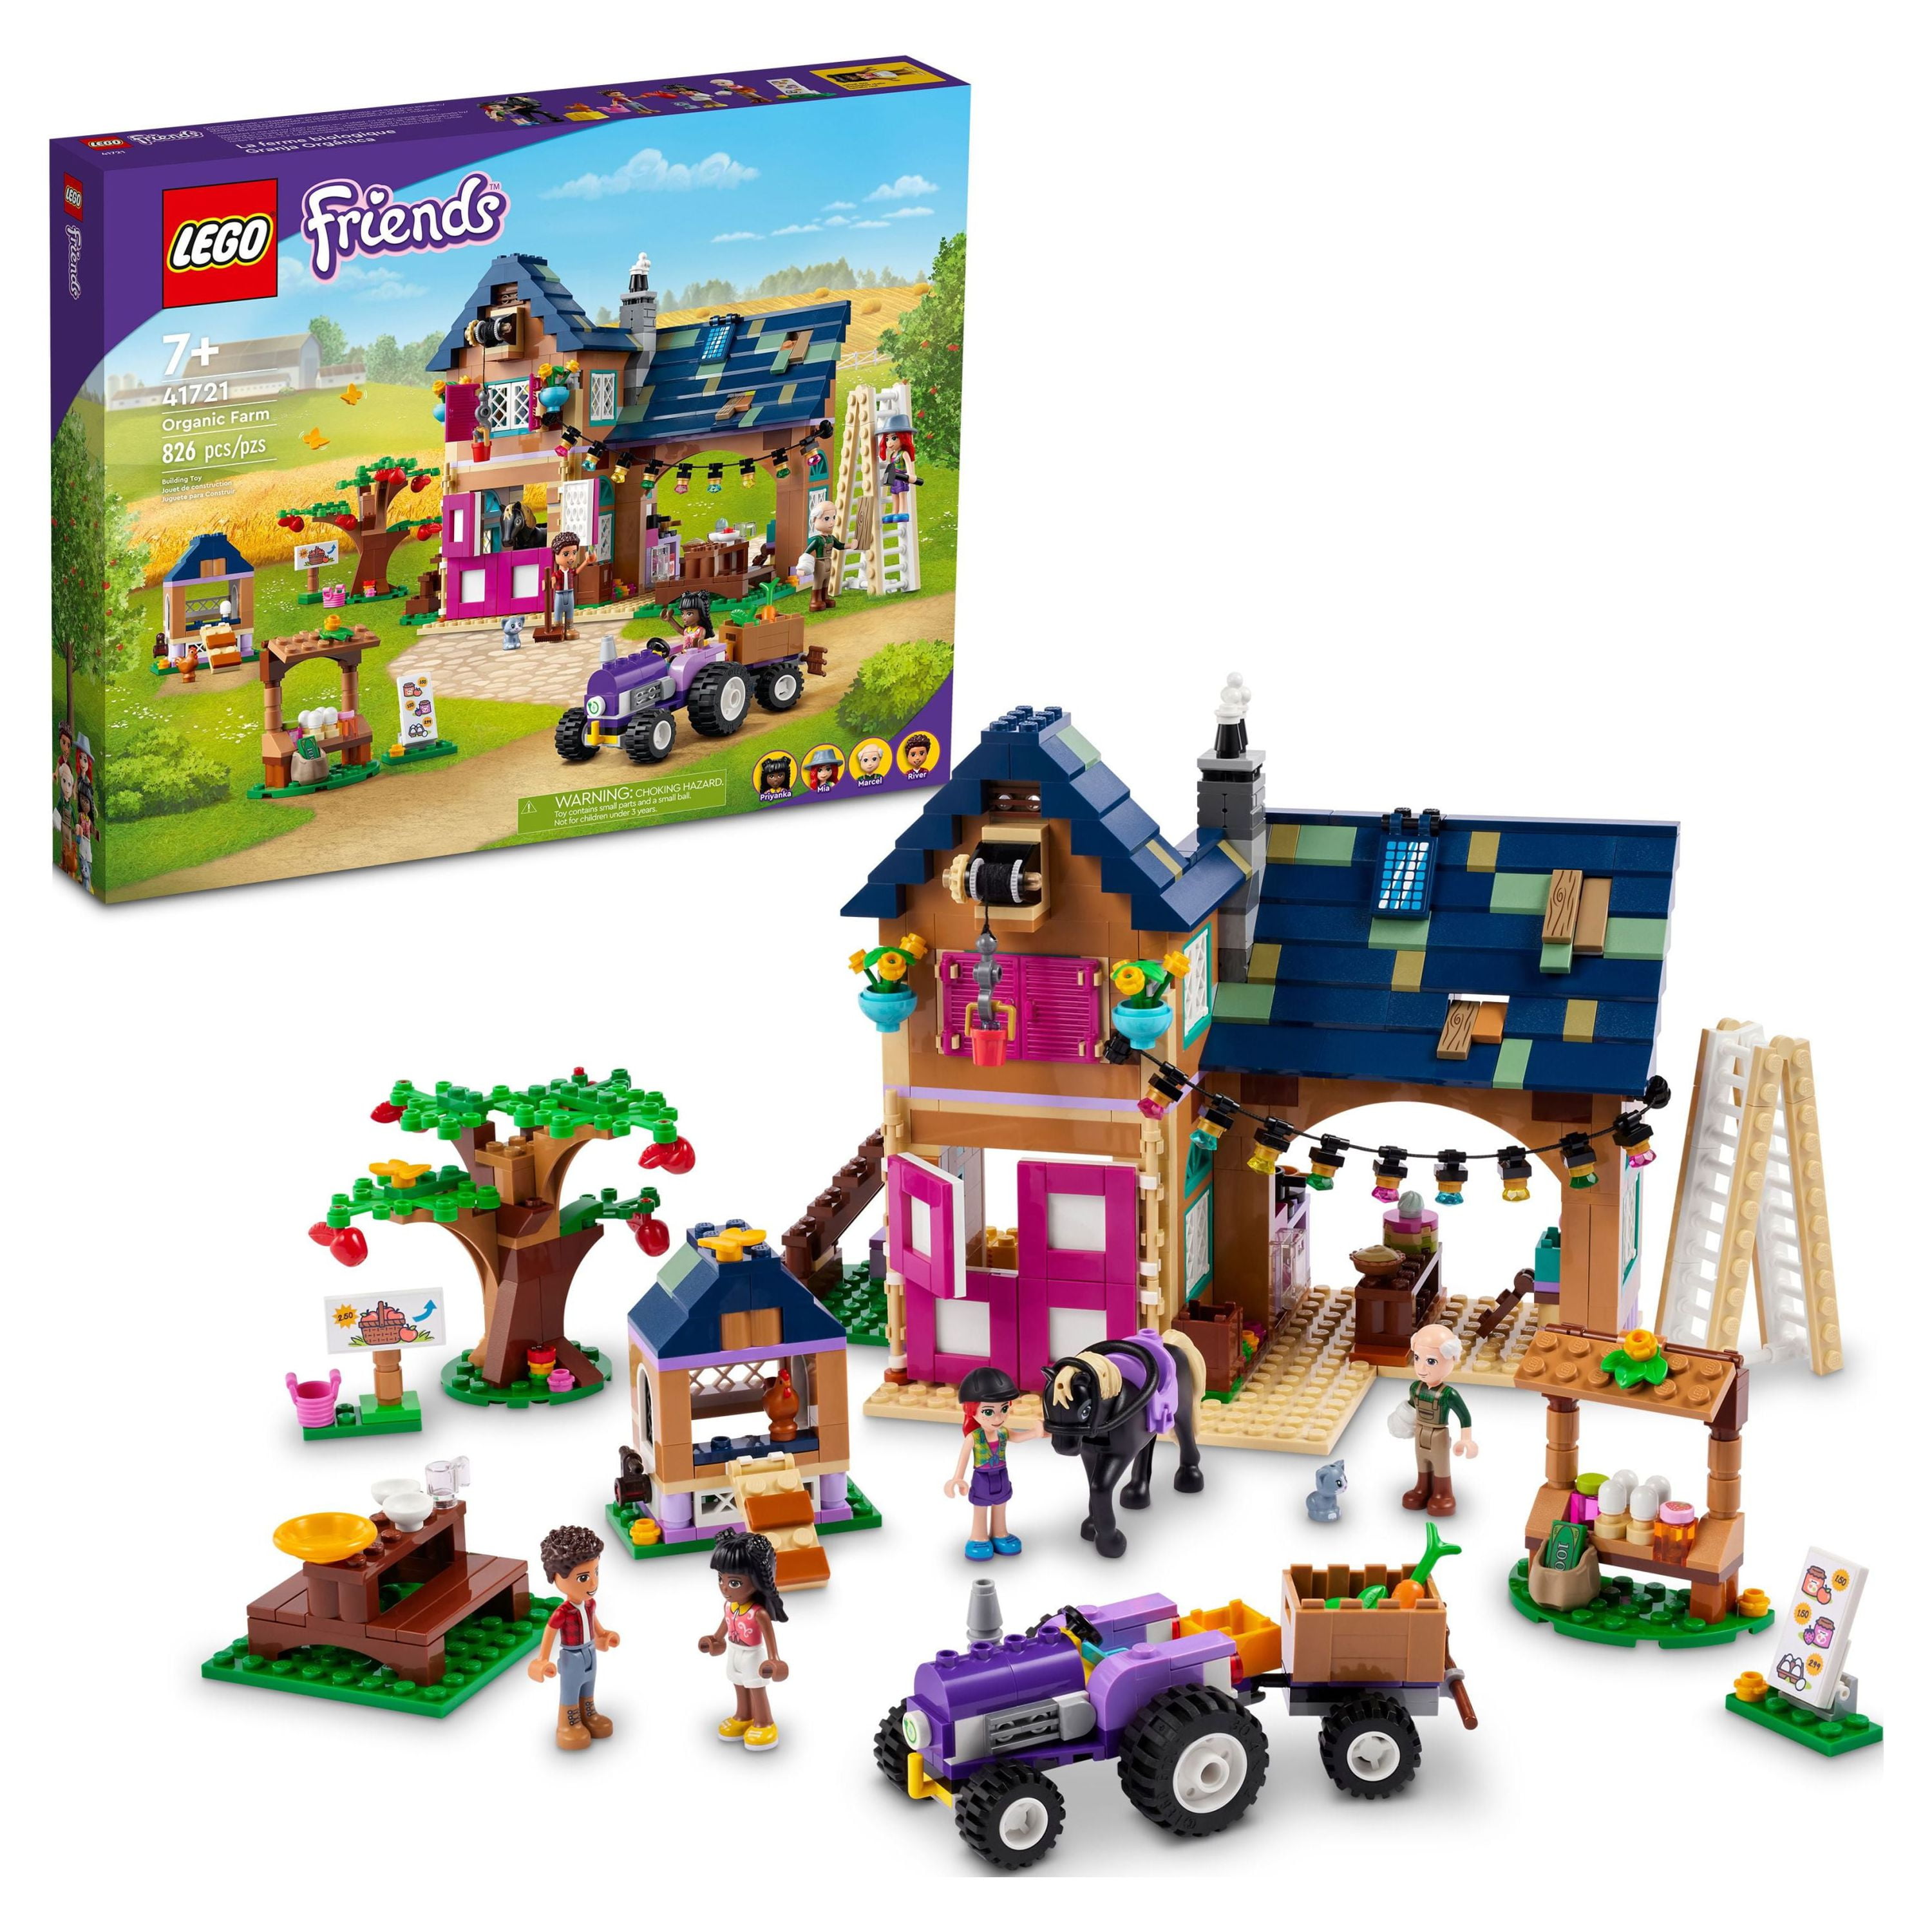 LEGO Friends Organic Farm House Set 41721 with Toy Horse, Stable